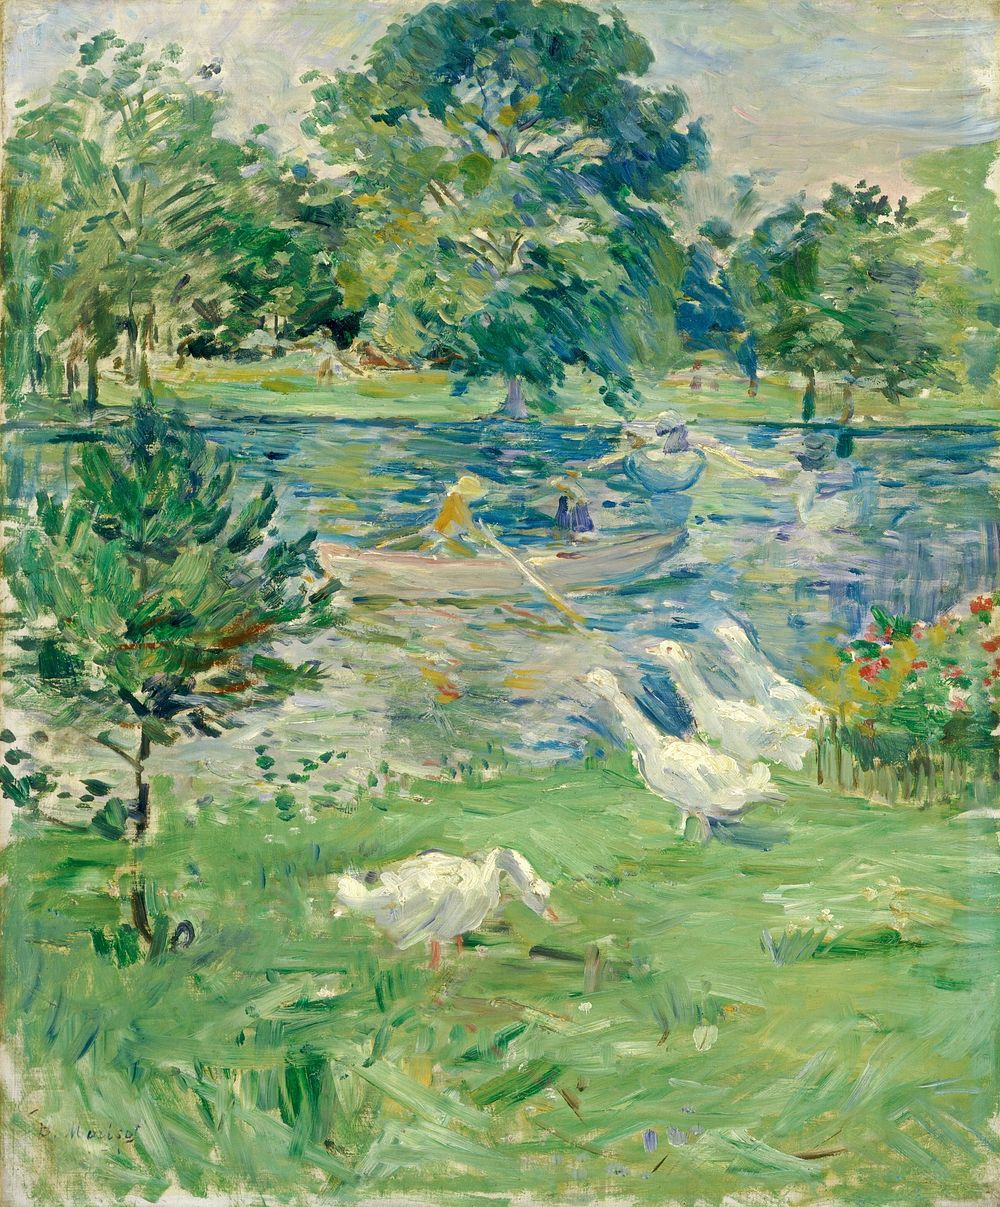 Girl in a Boat with Geese (c. 1889) painting in high resolution by Berthe Morisot.  